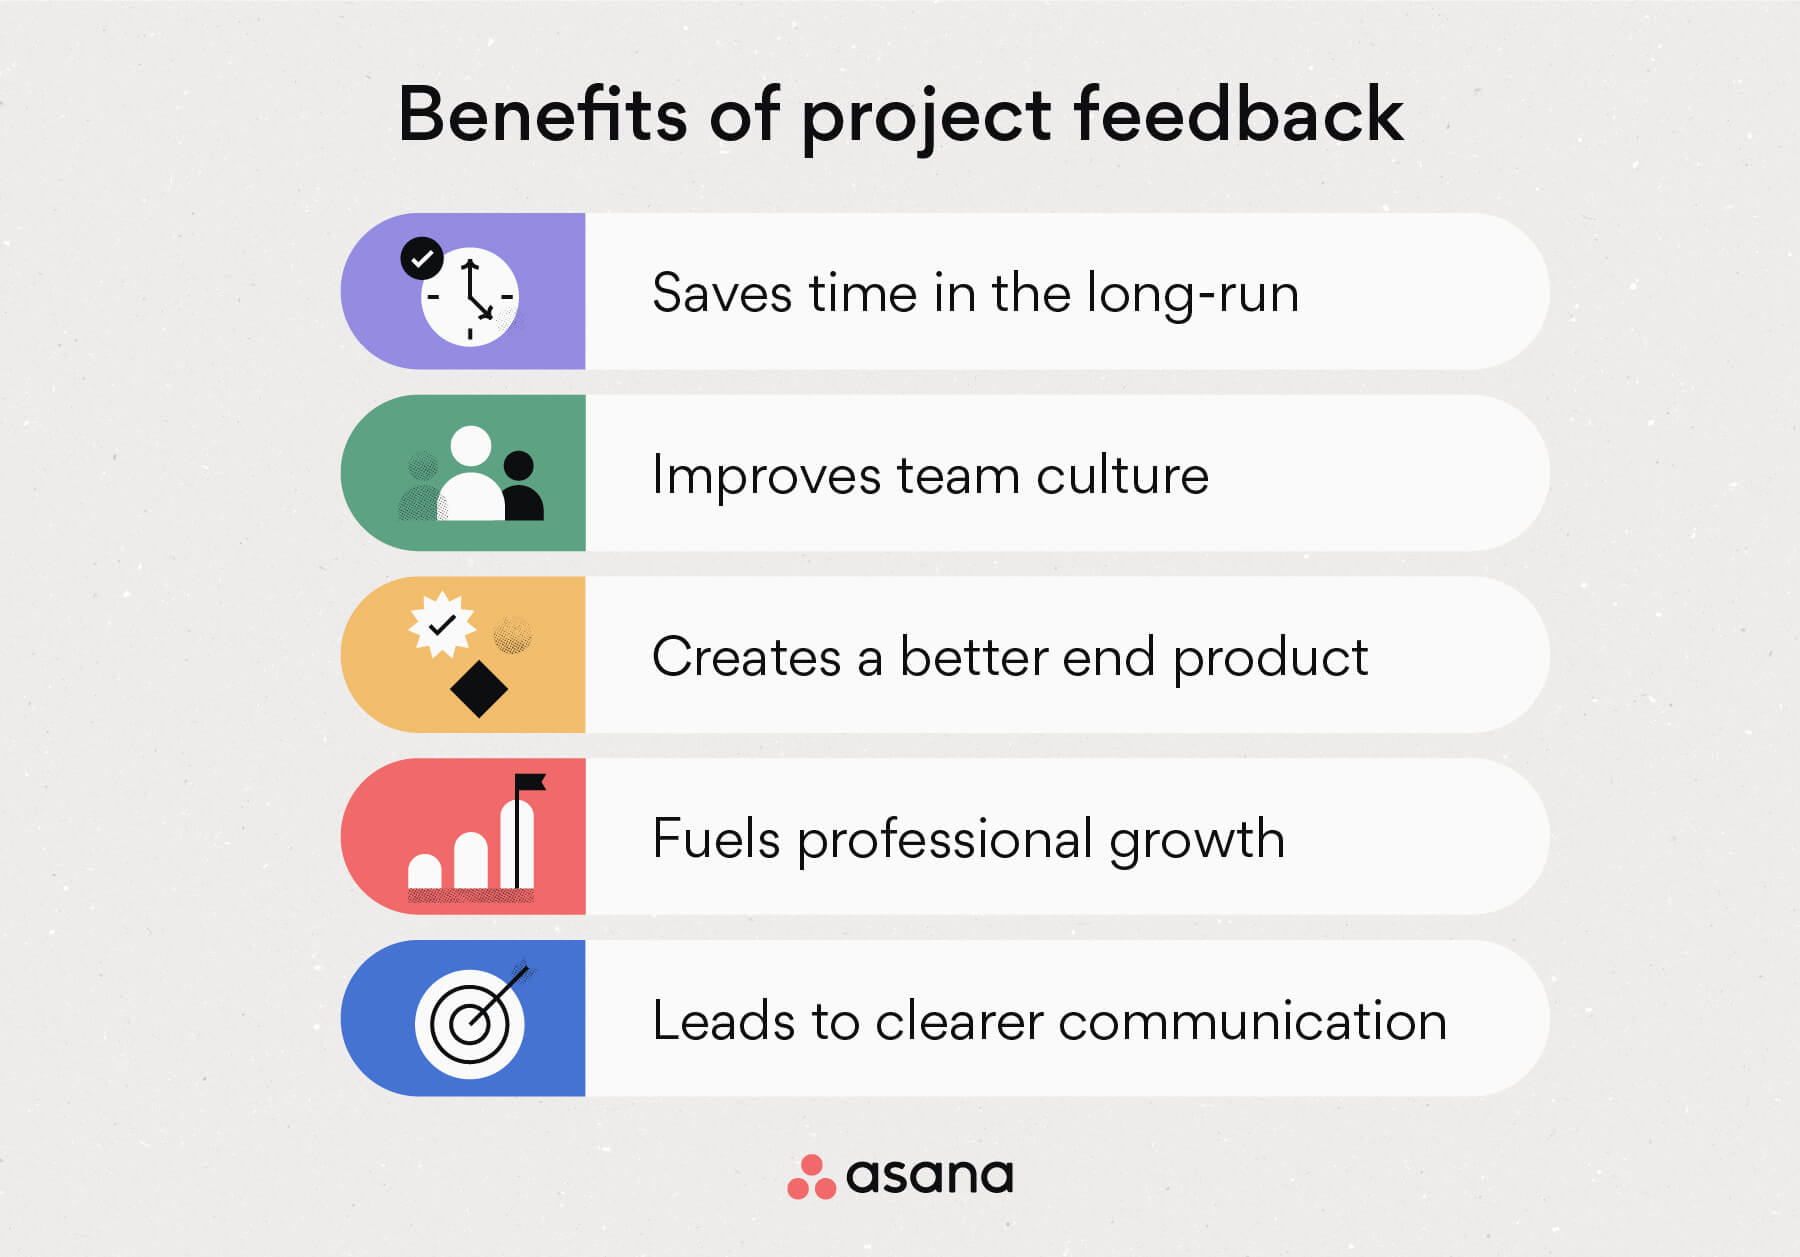 [inline illustration] Benefits of project feedback (infographic)